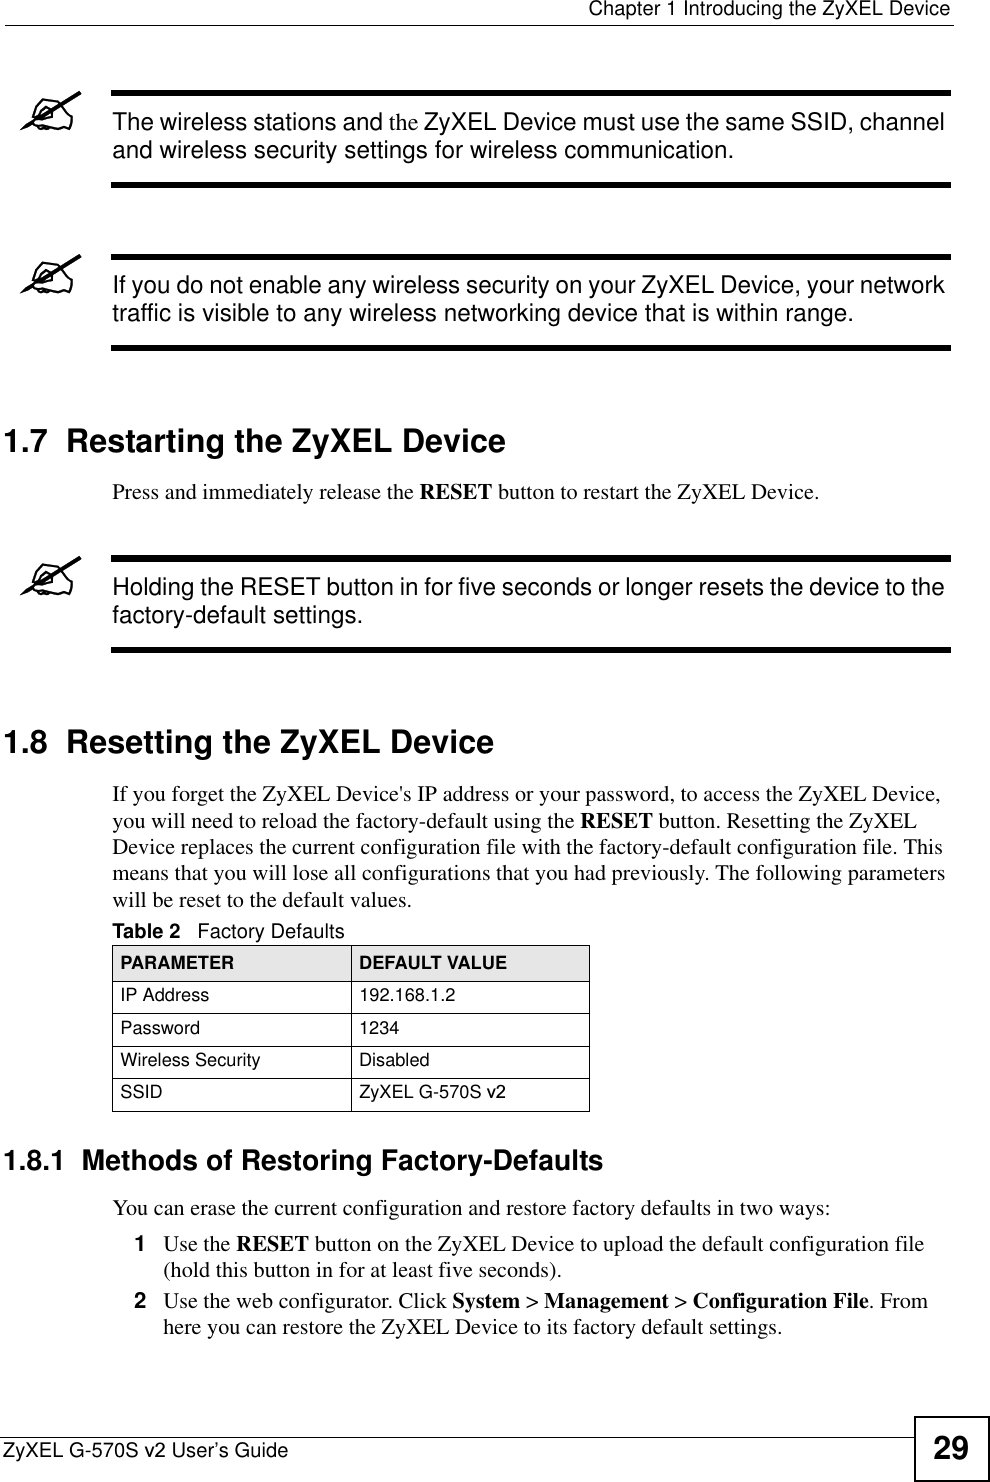  Chapter 1 Introducing the ZyXEL DeviceZyXEL G-570S v2 User’s Guide 29&quot;The wireless stations and the ZyXEL Device must use the same SSID, channel and wireless security settings for wireless communication.&quot;If you do not enable any wireless security on your ZyXEL Device, your network traffic is visible to any wireless networking device that is within range. 1.7  Restarting the ZyXEL DevicePress and immediately release the RESET button to restart the ZyXEL Device.&quot;Holding the RESET button in for five seconds or longer resets the device to the factory-default settings.1.8  Resetting the ZyXEL DeviceIf you forget the ZyXEL Device&apos;s IP address or your password, to access the ZyXEL Device, you will need to reload the factory-default using the RESET button. Resetting the ZyXEL Device replaces the current configuration file with the factory-default configuration file. This means that you will lose all configurations that you had previously. The following parameters will be reset to the default values.1.8.1  Methods of Restoring Factory-DefaultsYou can erase the current configuration and restore factory defaults in two ways: 1Use the RESET button on the ZyXEL Device to upload the default configuration file (hold this button in for at least five seconds). 2Use the web configurator. Click System &gt; Management &gt; Configuration File. From here you can restore the ZyXEL Device to its factory default settings. Table 2   Factory DefaultsPARAMETER DEFAULT VALUEIP Address 192.168.1.2Password 1234Wireless Security DisabledSSID ZyXEL G-570S v2